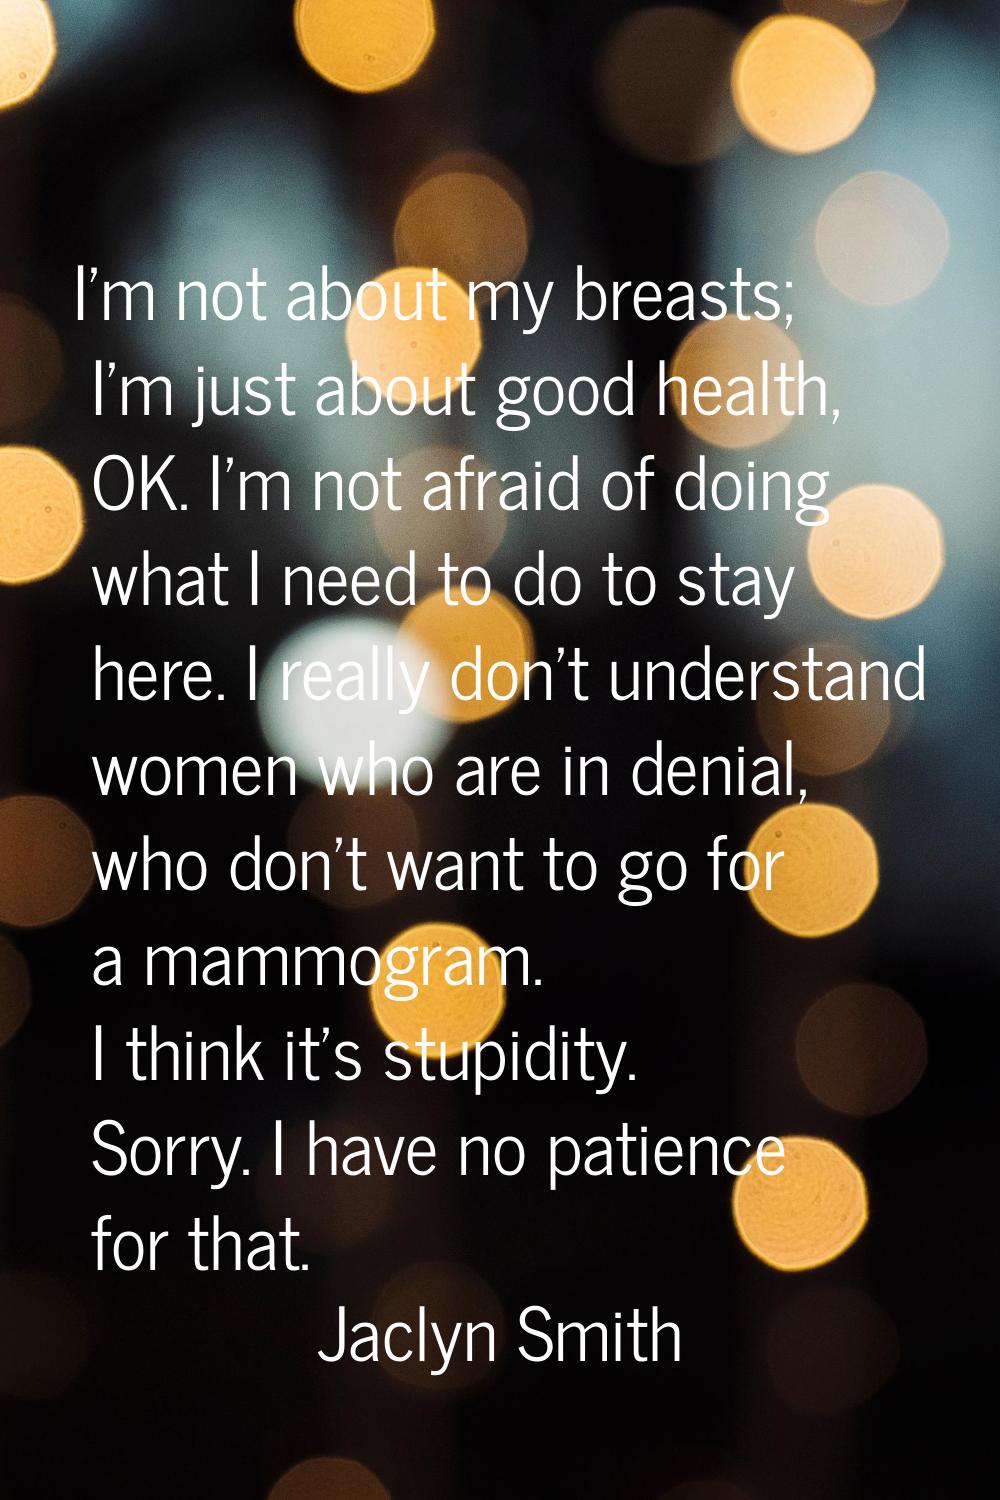 I'm not about my breasts; I'm just about good health, OK. I'm not afraid of doing what I need to do